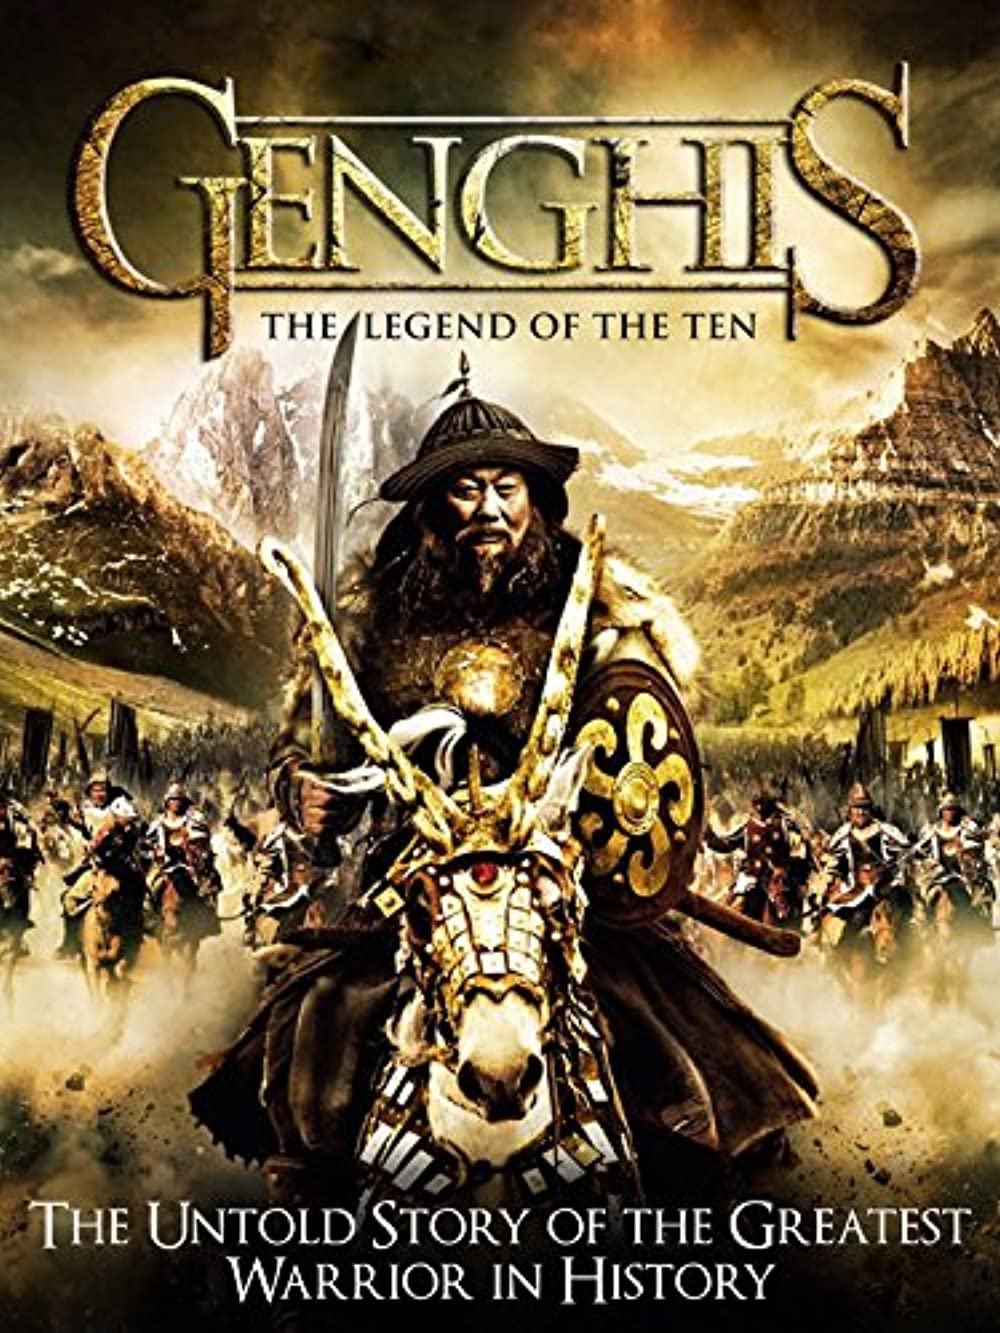 Genghis The Legend of the Ten 2012 Hindi ORG Dual Audio 720p BluRay ESub 1GB Download